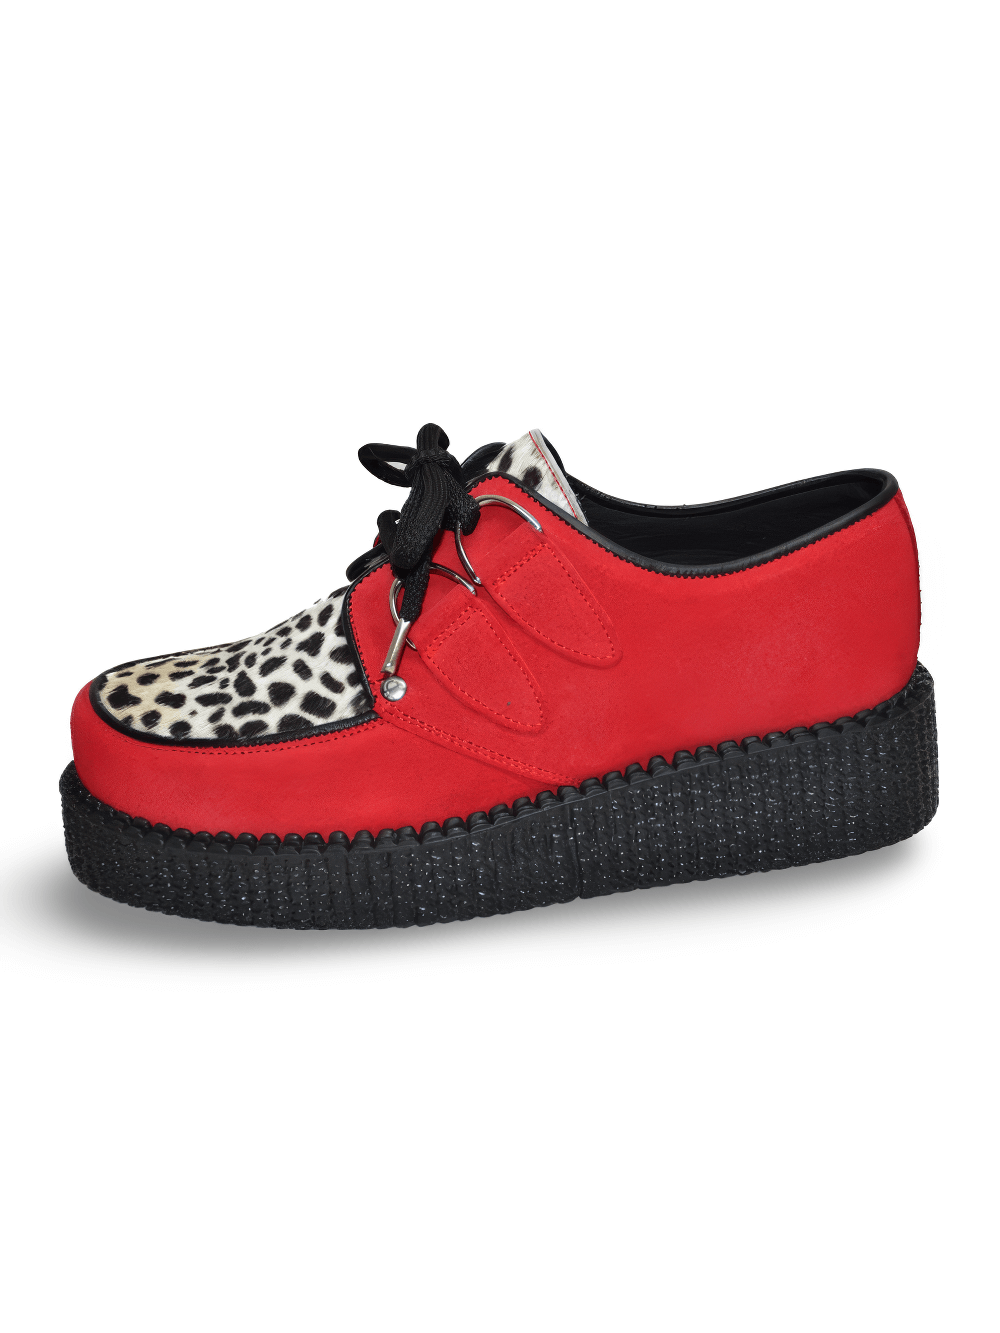 Bold Unisex Red Lace-Up Creepers in Suede and Fur